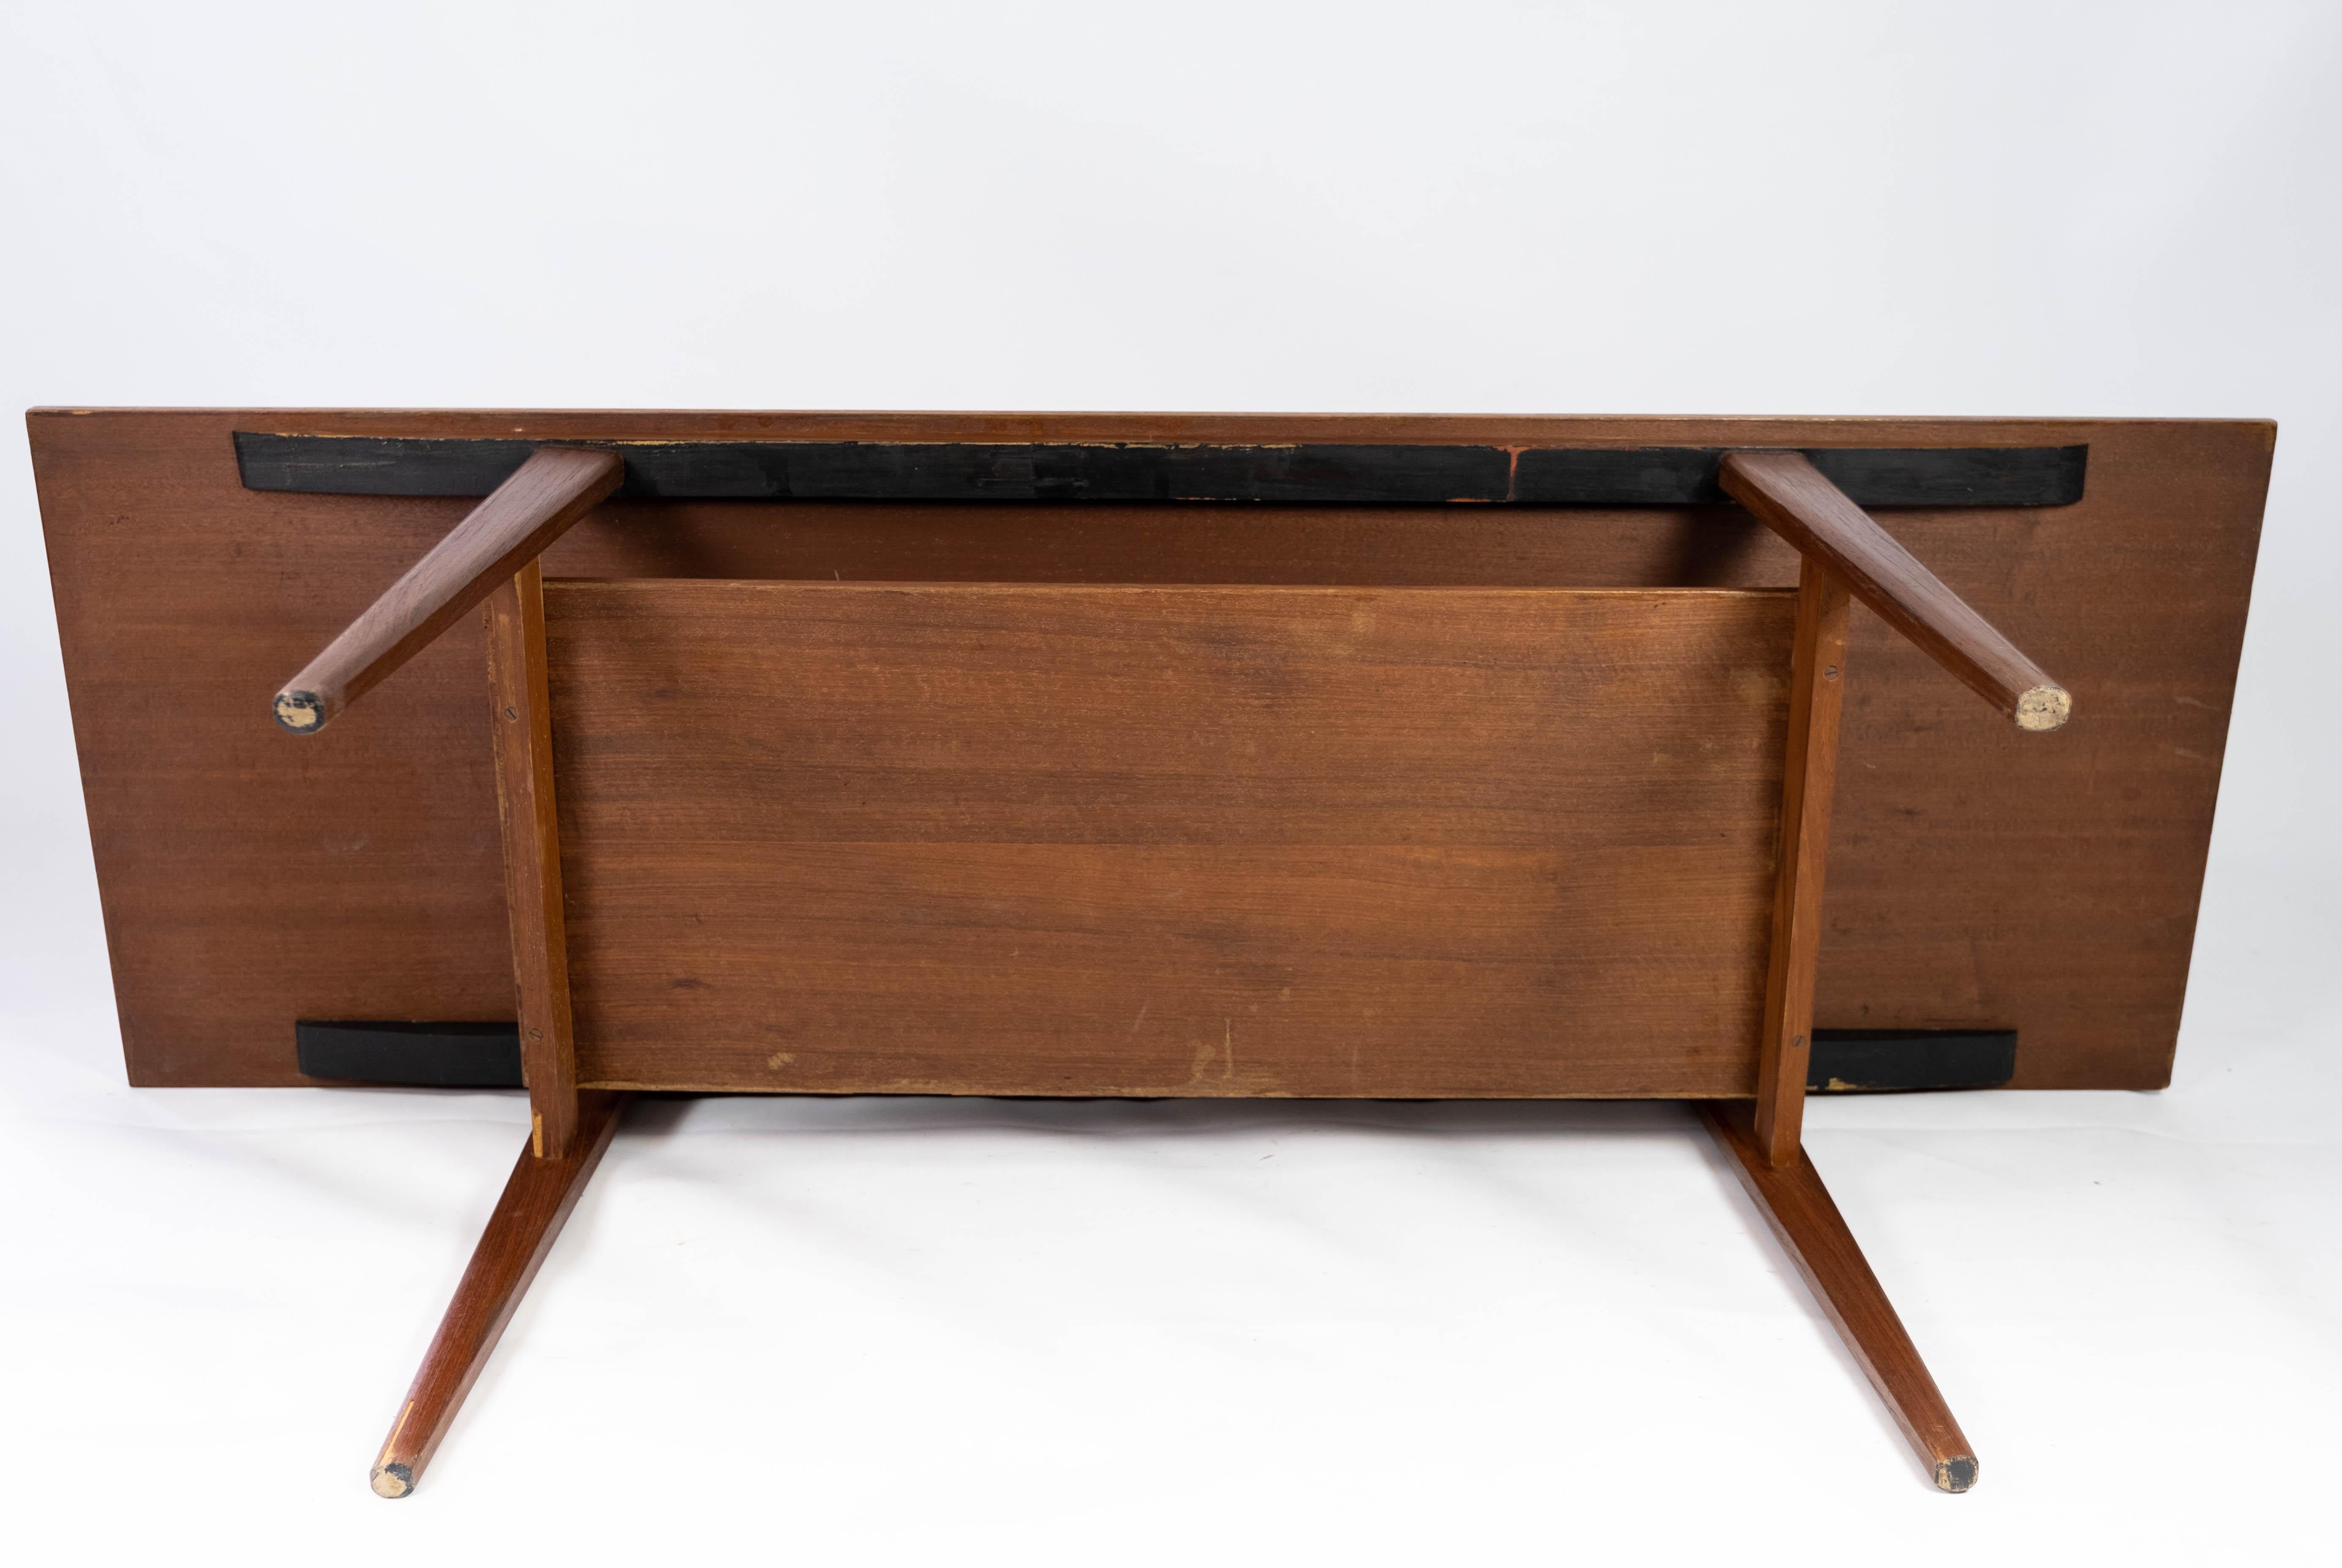 Coffee Table Made In Teak With Shelf, Danish Design From 1960s For Sale 8